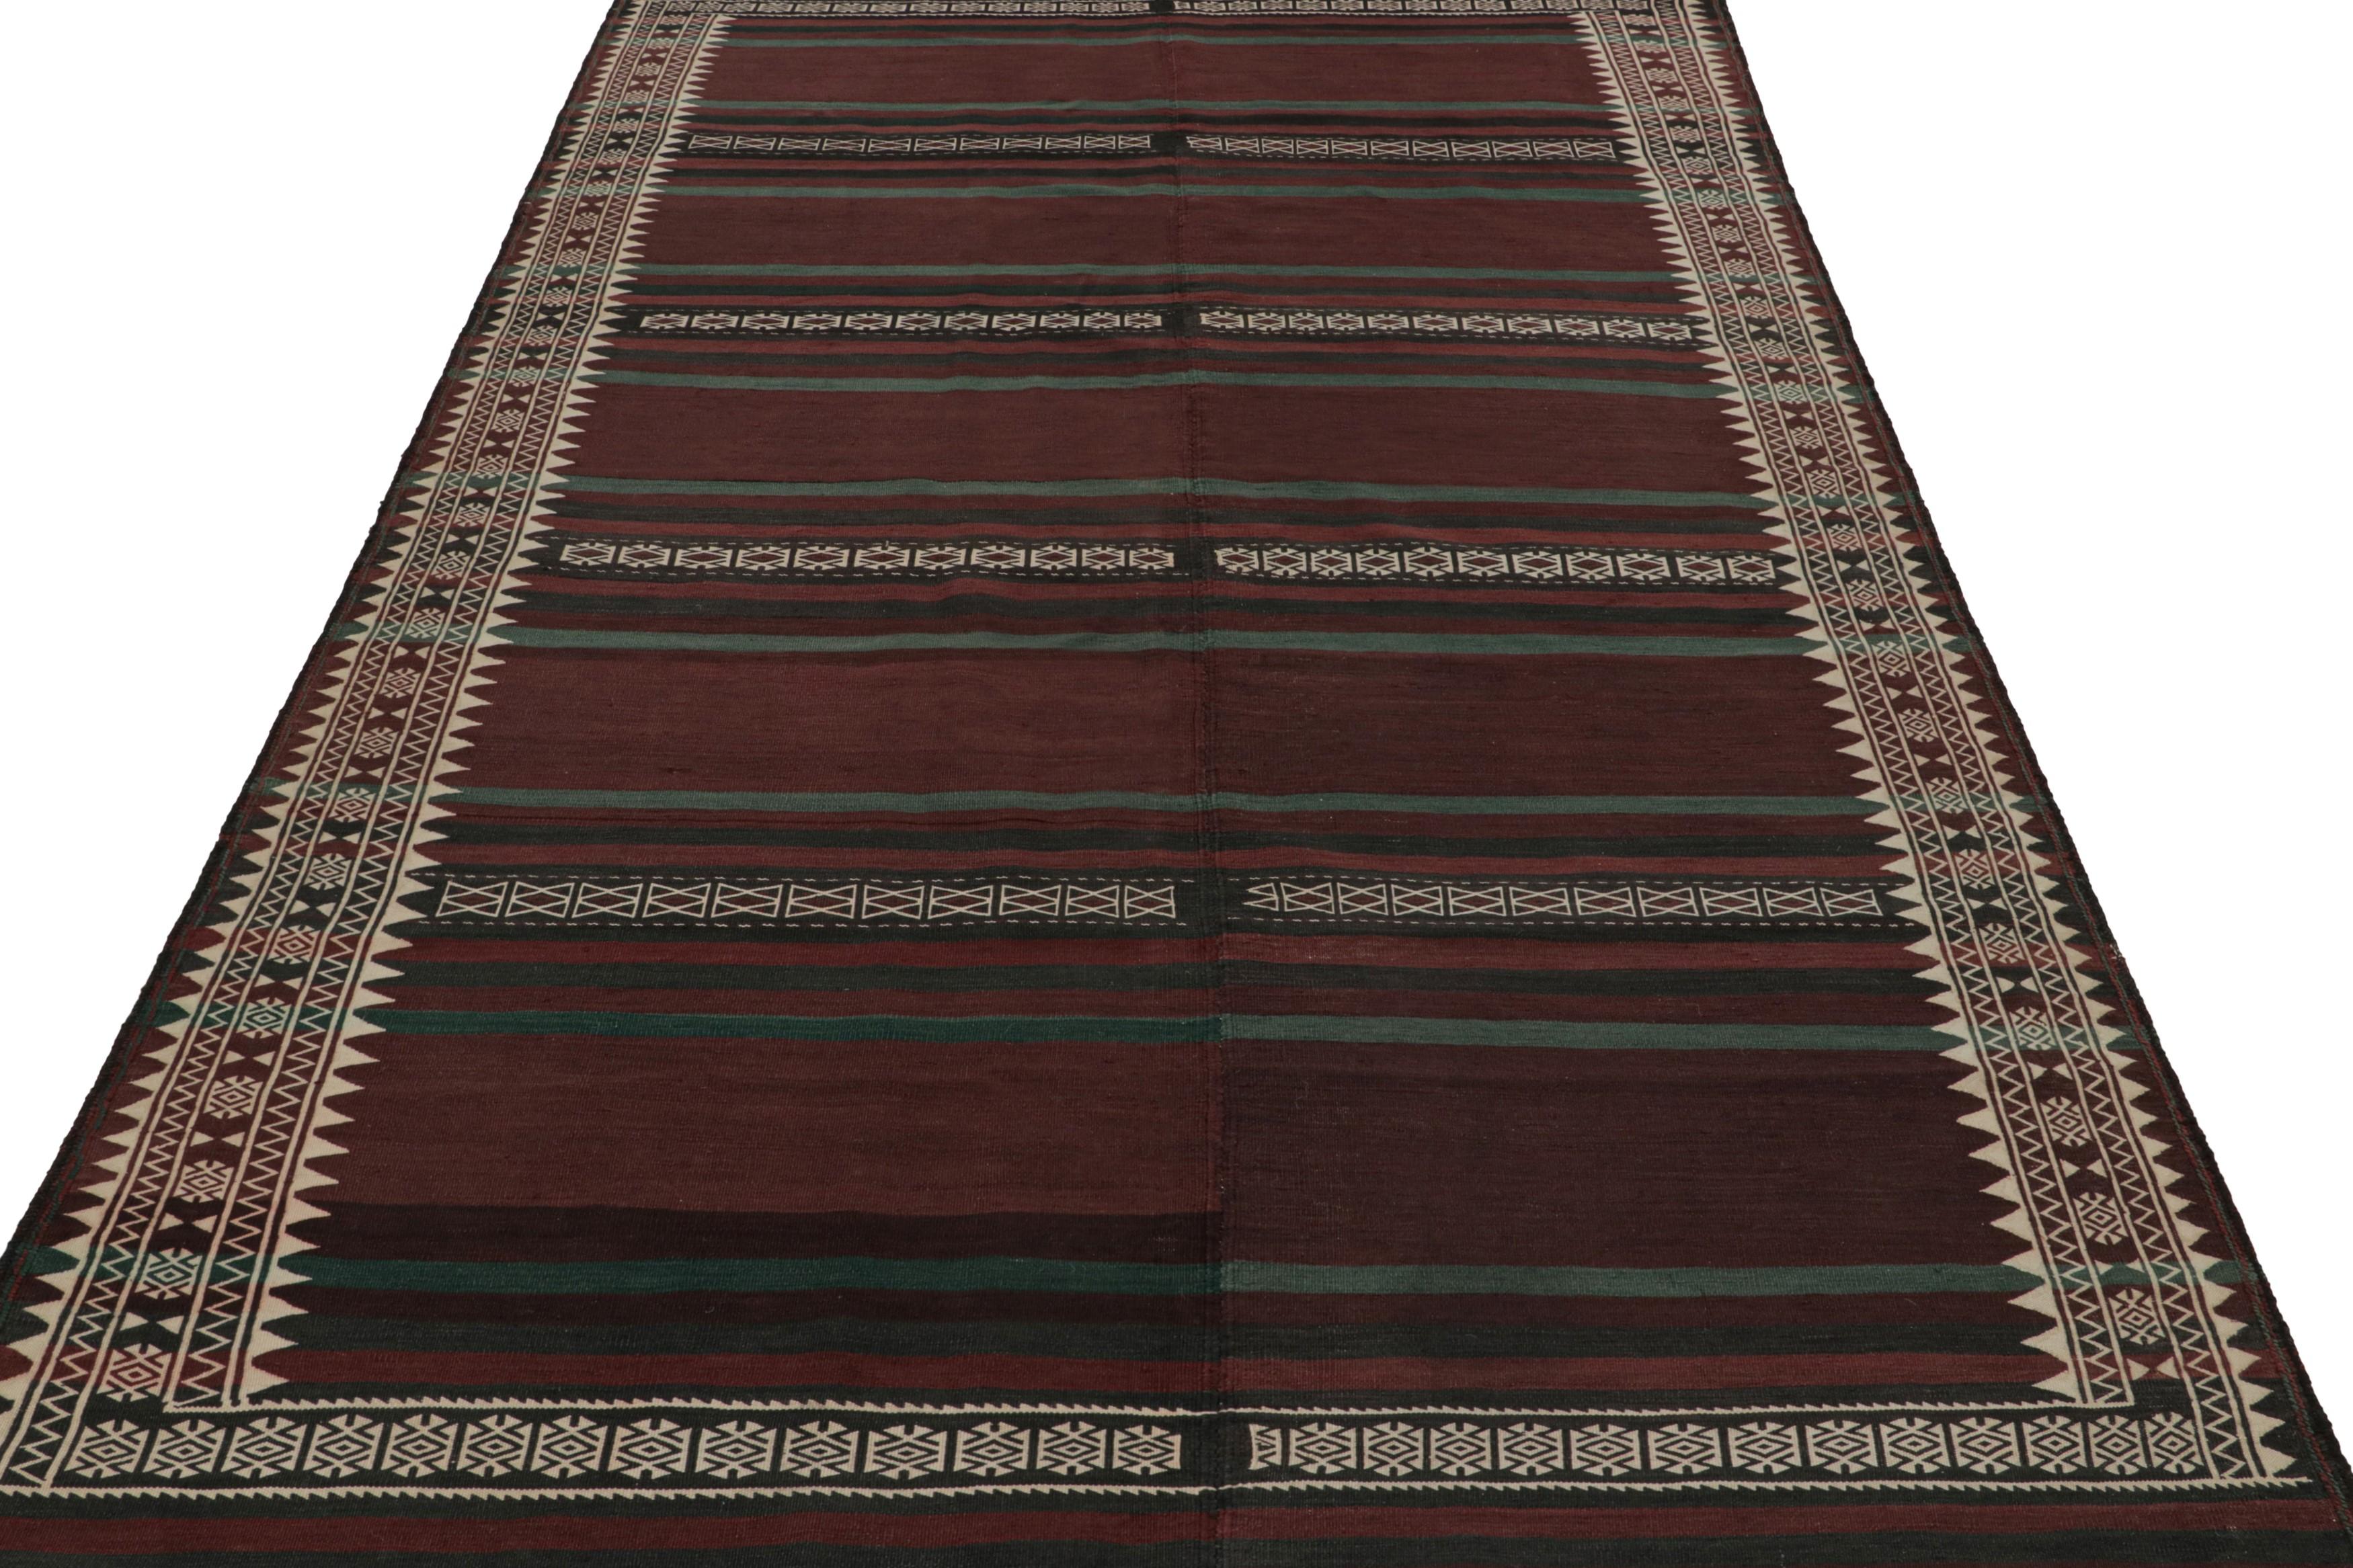 Hand-Woven Vintage Afghan Tribal Kilim with Brown, Green & Black Stripes by Rug & Kilim For Sale